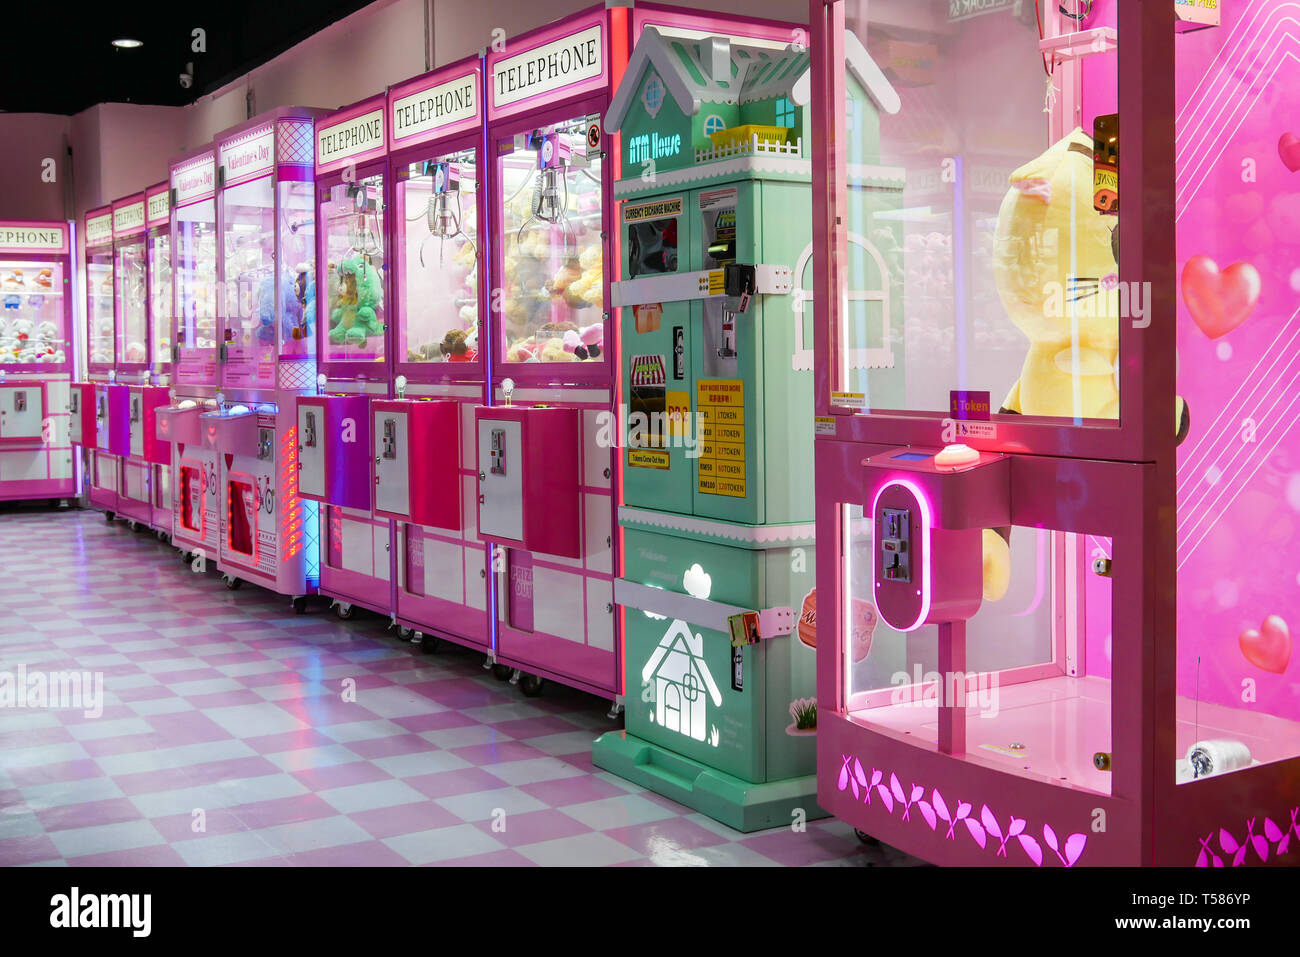 Kuala Lumpur,Malaysia - April 13,2019 : Colorful arcade game toy claw crane machine where people can win toys and other prizes which is located in the Stock Photo